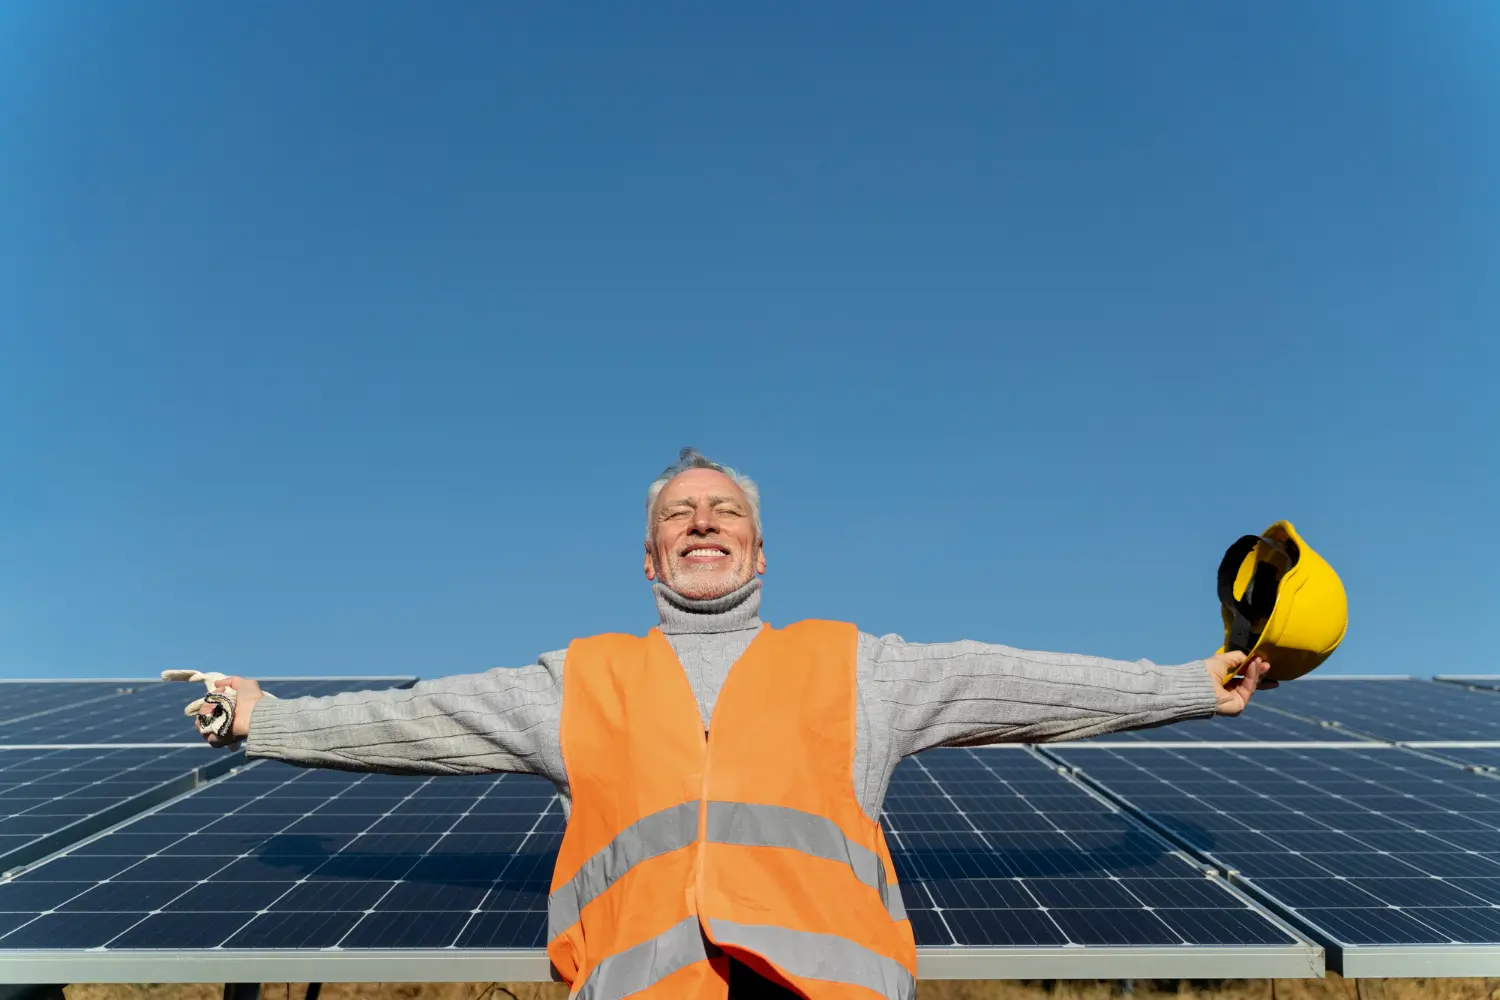 Worker-in-orange-vest-holding-yellow-hard-hat-in-front-of-solar-panels